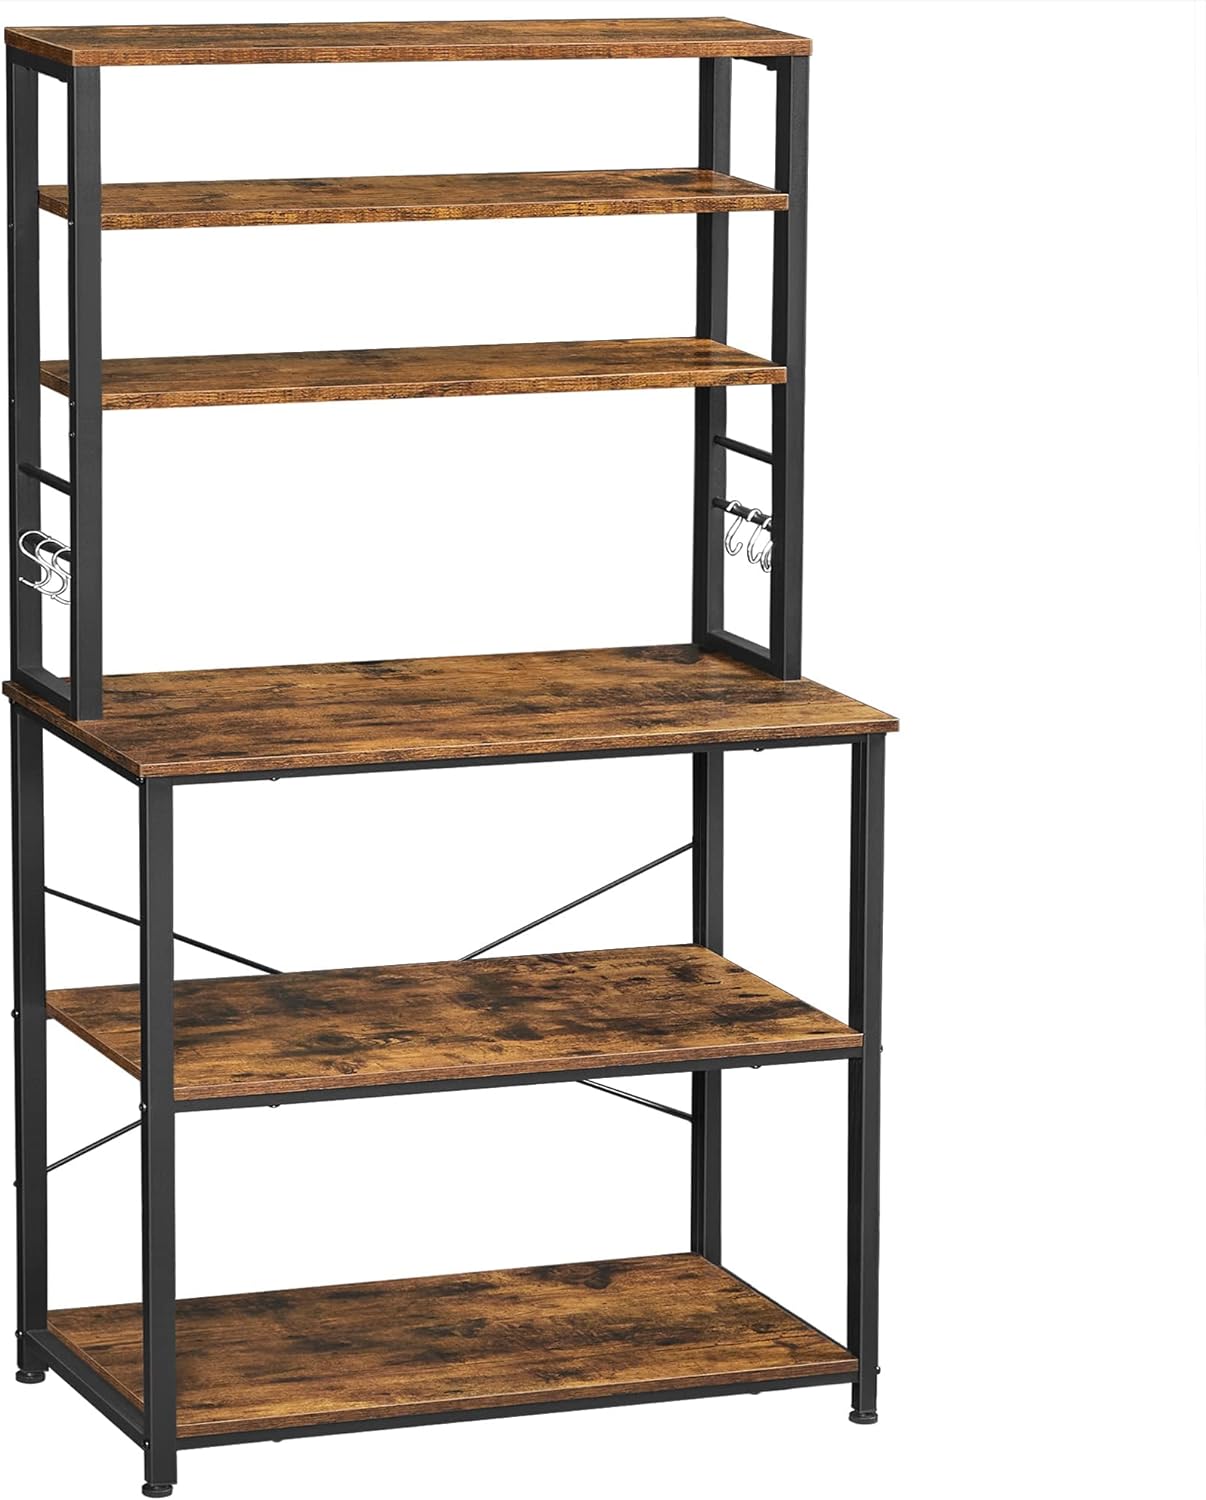 VASAGLE Coffee Bar, Baker’s Rack for Kitchen with Storage